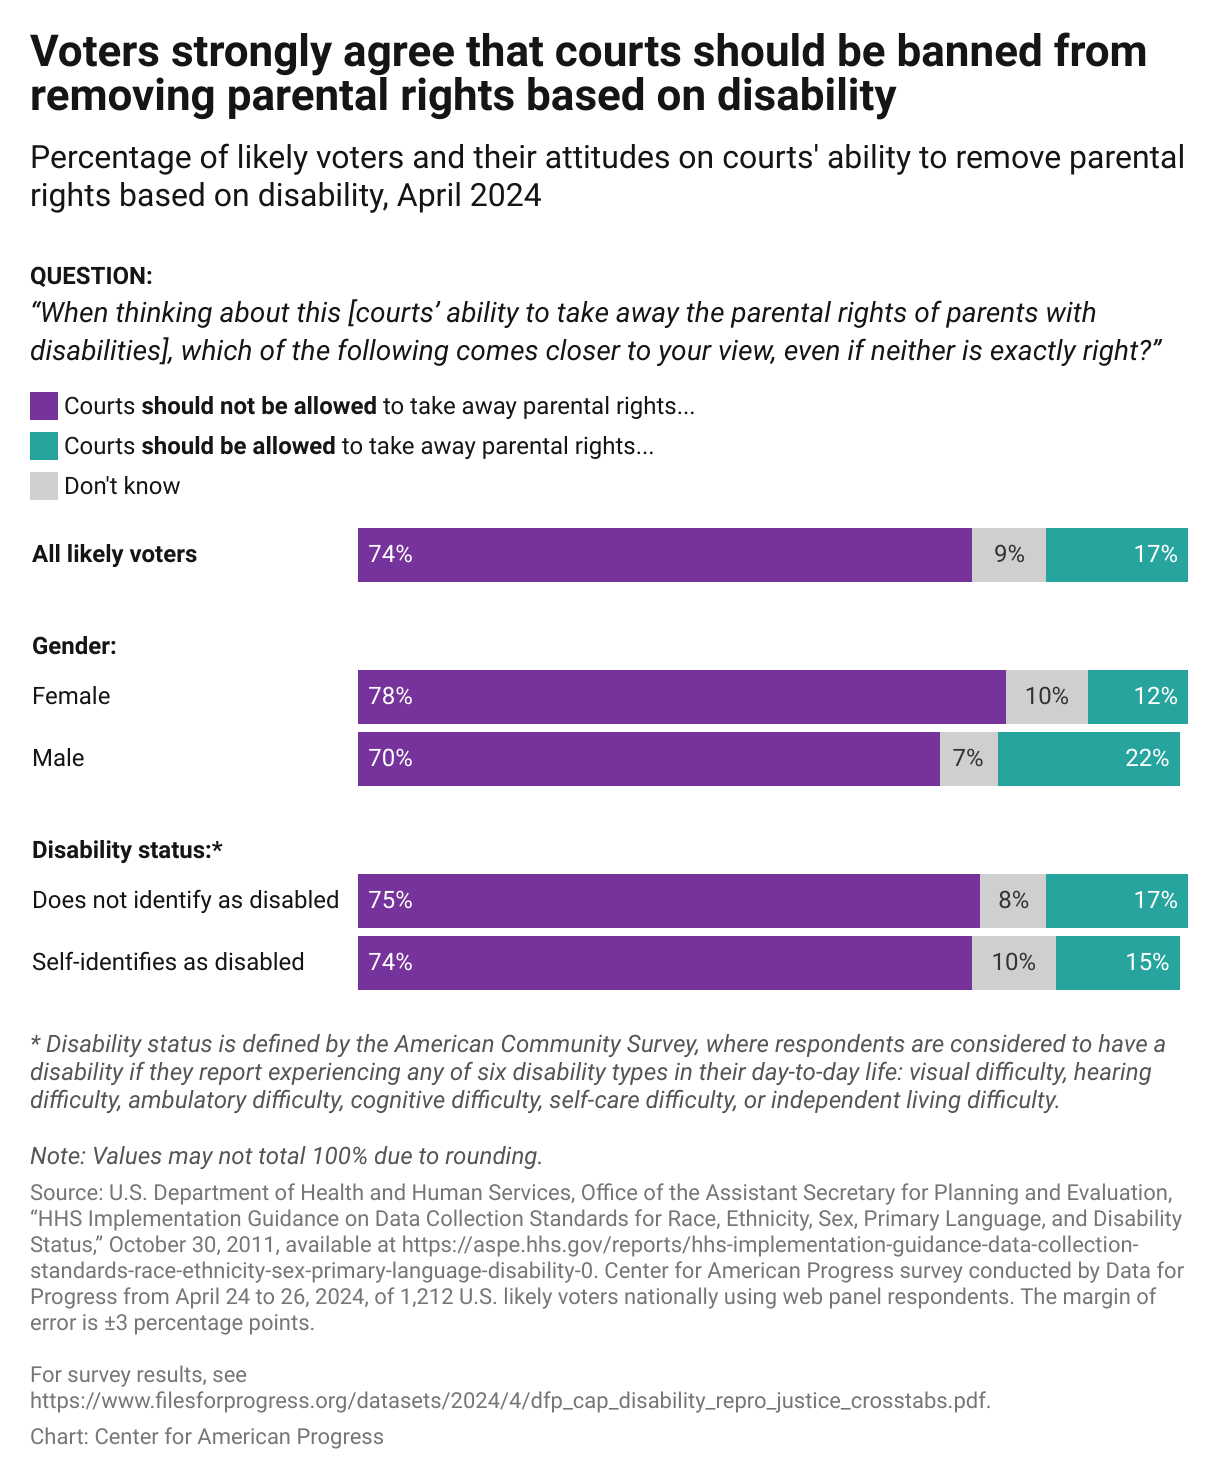 Bar chart showing the percentage of likely voters who believe that courts should be banned from removing parental rights based on disability. Seventy-four percent of respondents agree that courts should not be able to take away parental rights based on disability. This is in comparison to 17 percent of respondents who believe that courts should be allowed to take disabled parents’ children away even when there’s no evidence of neglect.